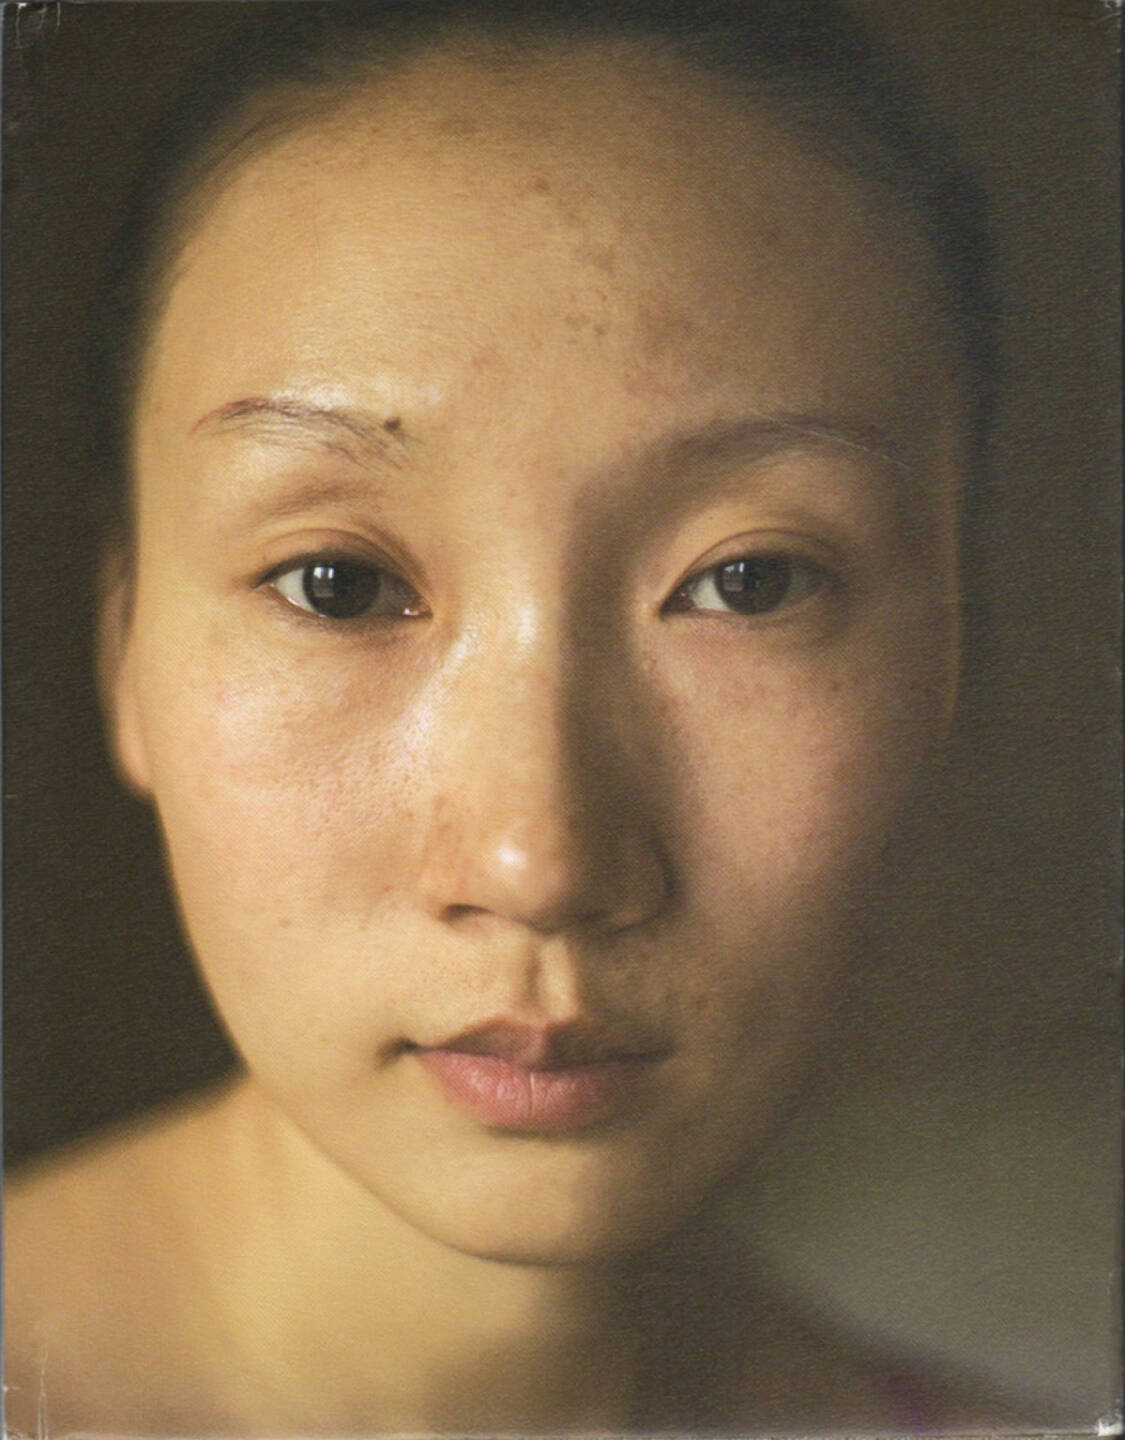 Xu Yong - This Face (徐勇《這張臉》), Culture of China Publication 2011, Cover - http://josefchladek.com/book/xu_yong_-_this_face_徐勇這張臉